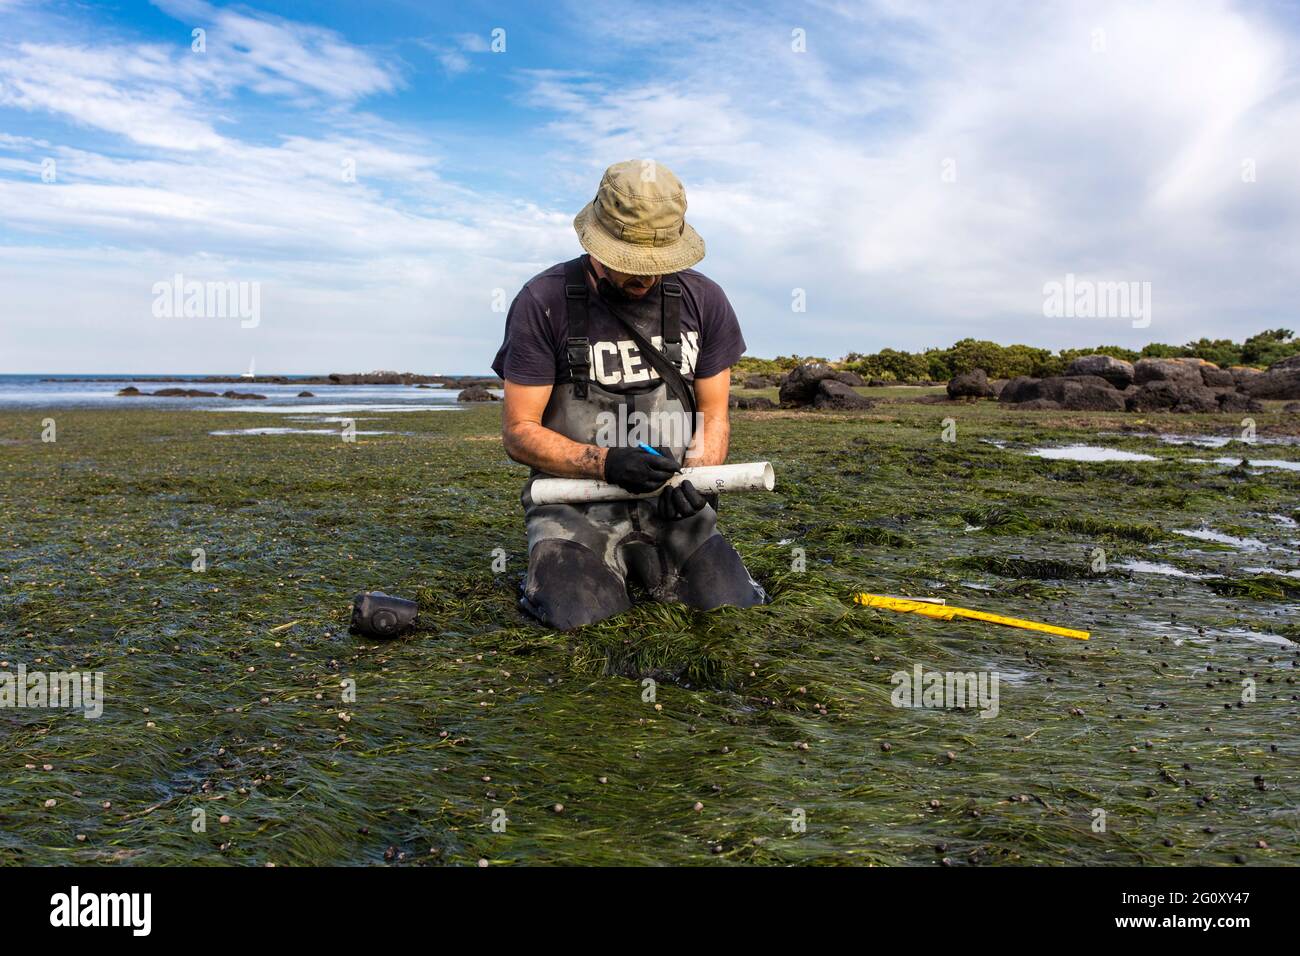 Scientist collecting a sediment core to asses carbon sequestration rates in the sediment of a tidal seagrass bed. Stock Photo